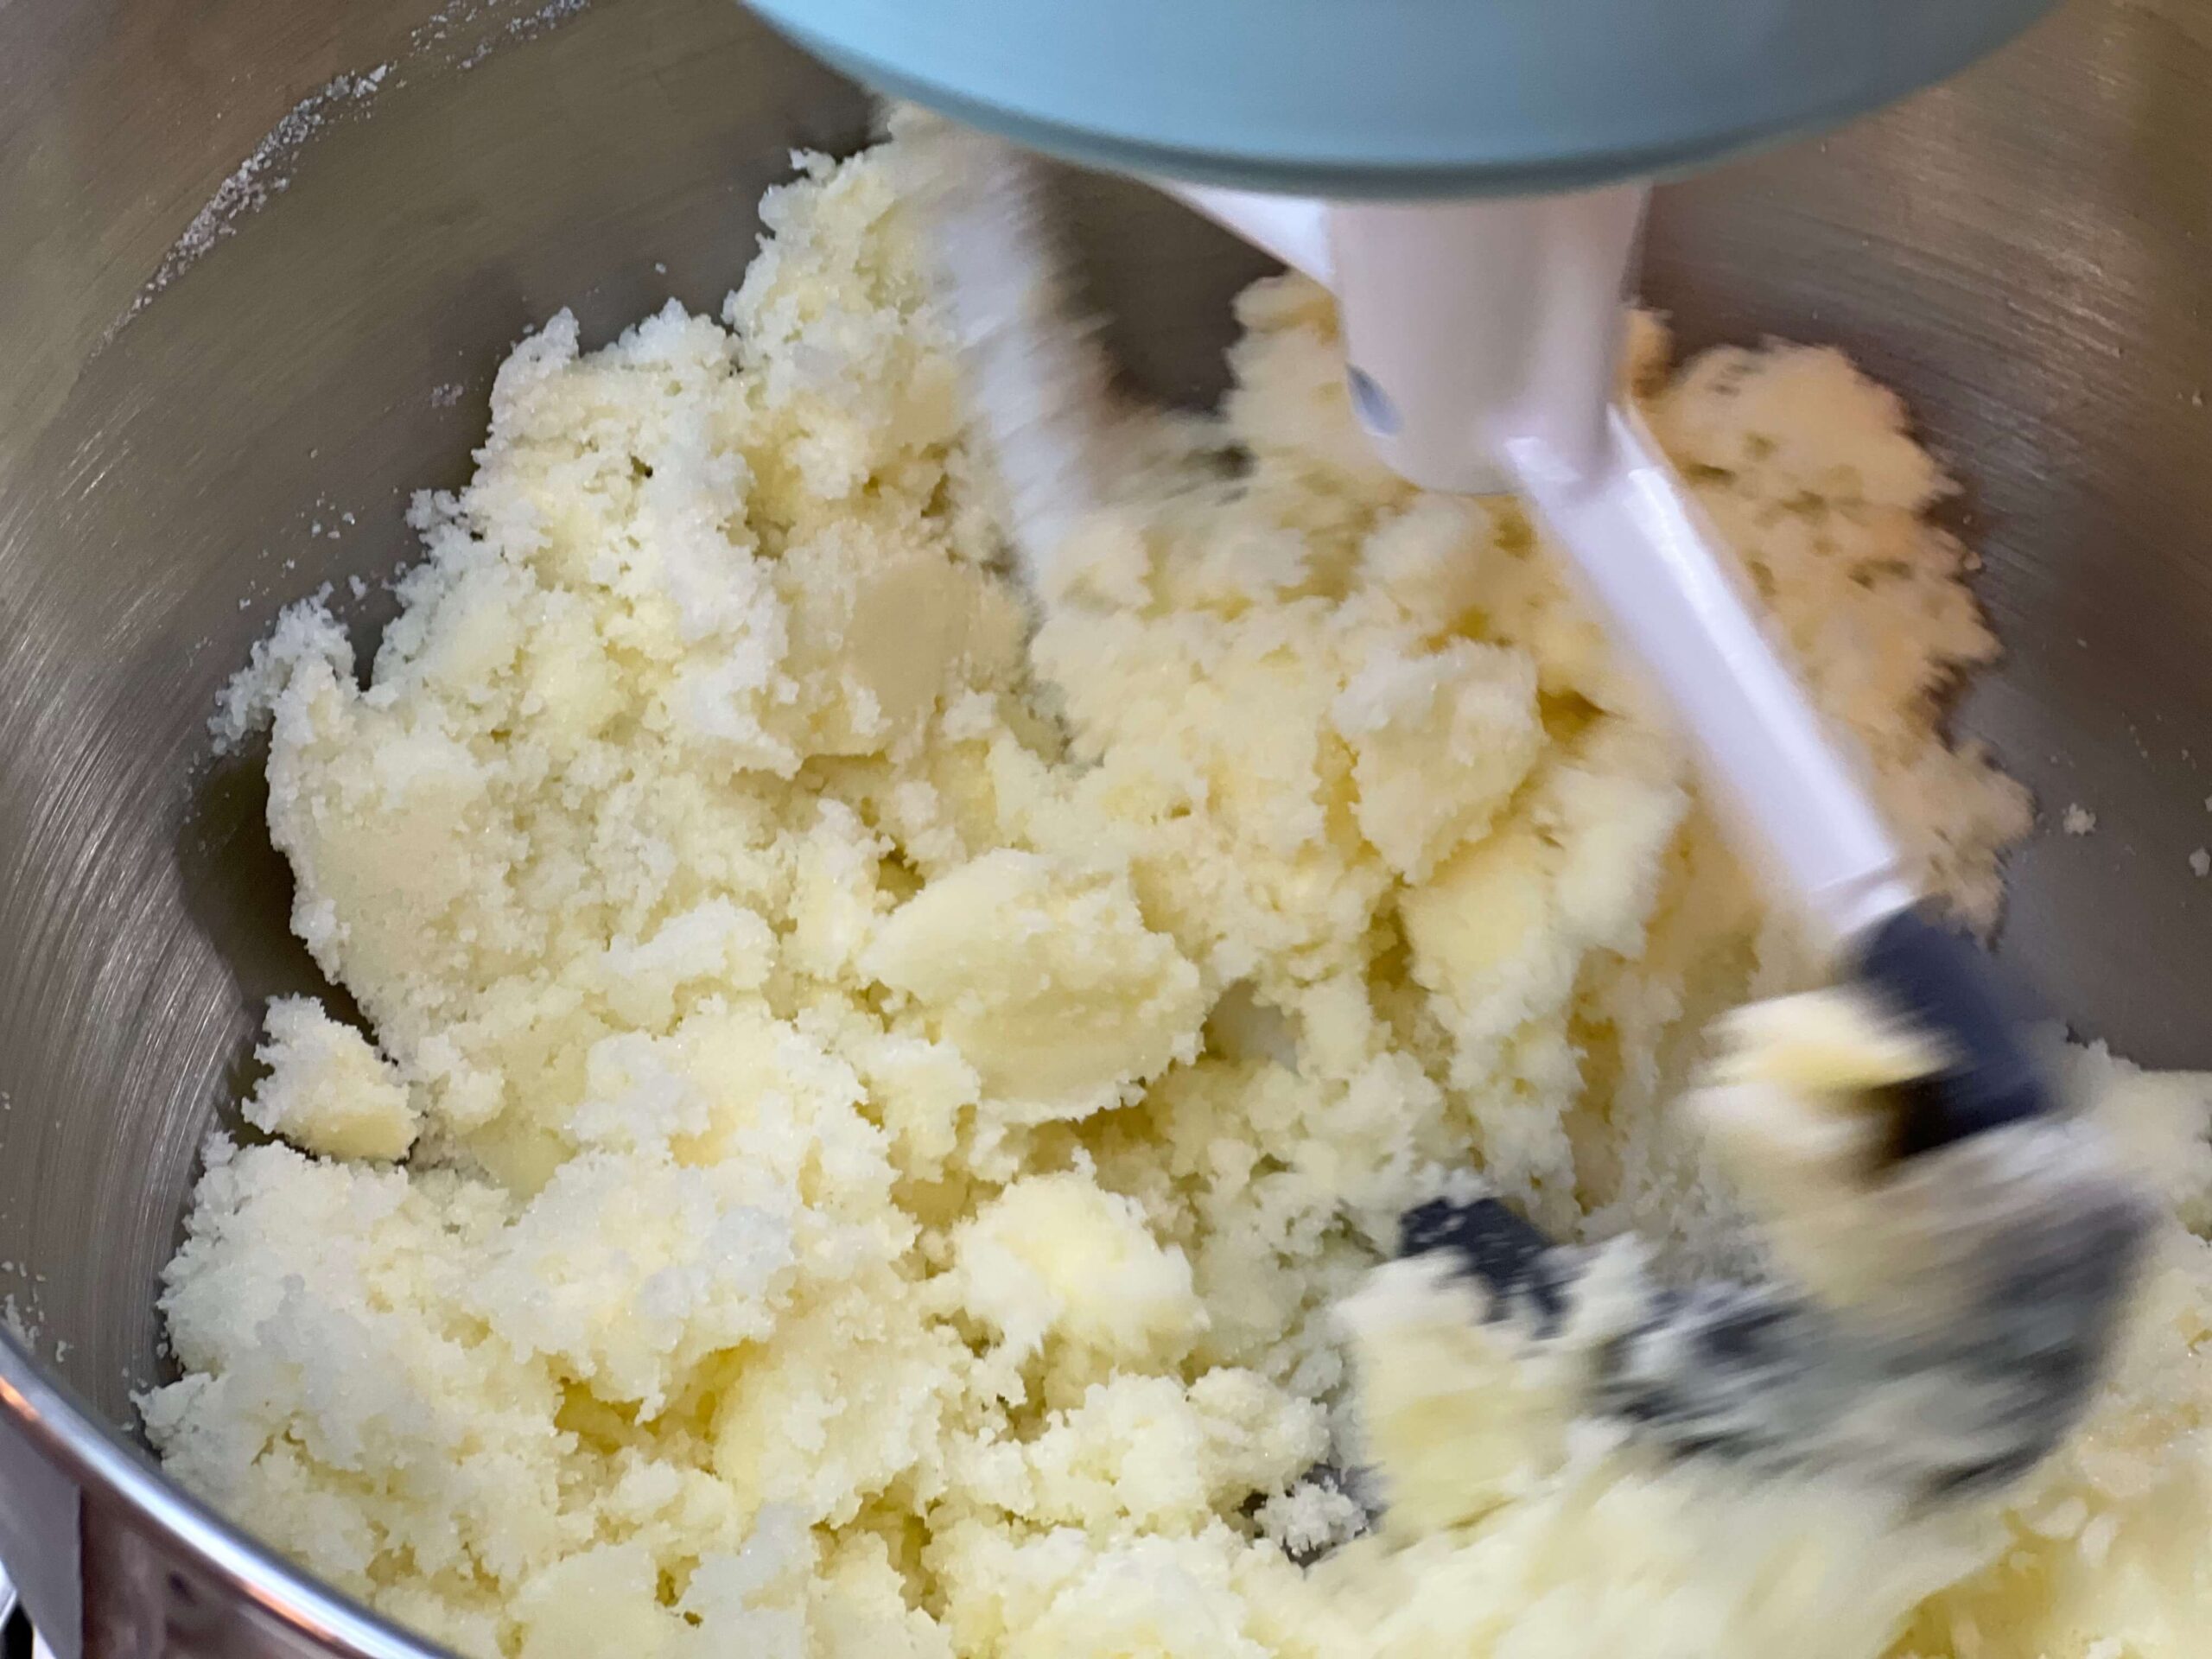 Mix butter and sugar well for the almond cookies